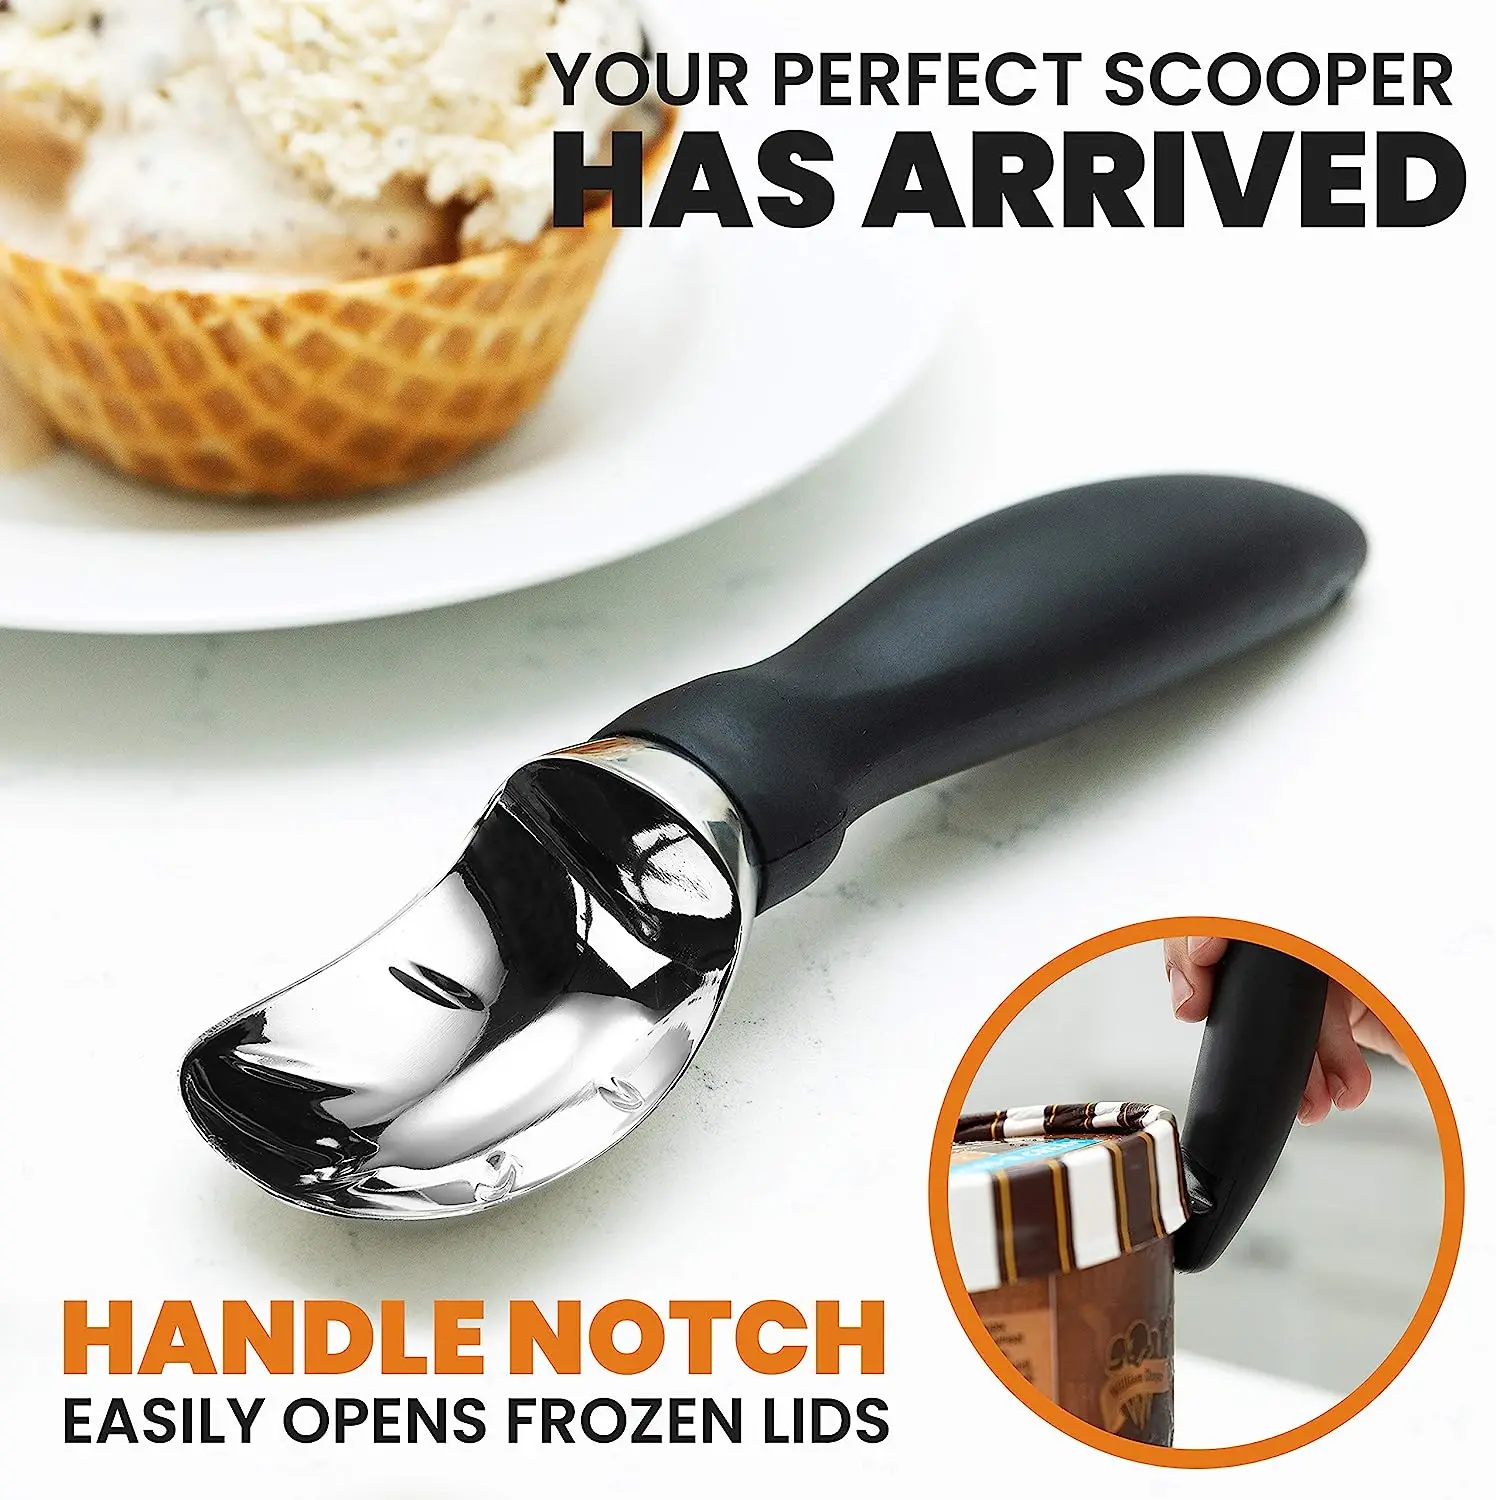 https://ae01.alicdn.com/kf/S6315978b47394728906a3b98b69aa83a1/Ice-Cream-Scoop-with-Soft-Grip-Handle-Professional-Heavy-Duty-Sturdy-Scooper-Kitchen-Tool-for-Cookie.jpg